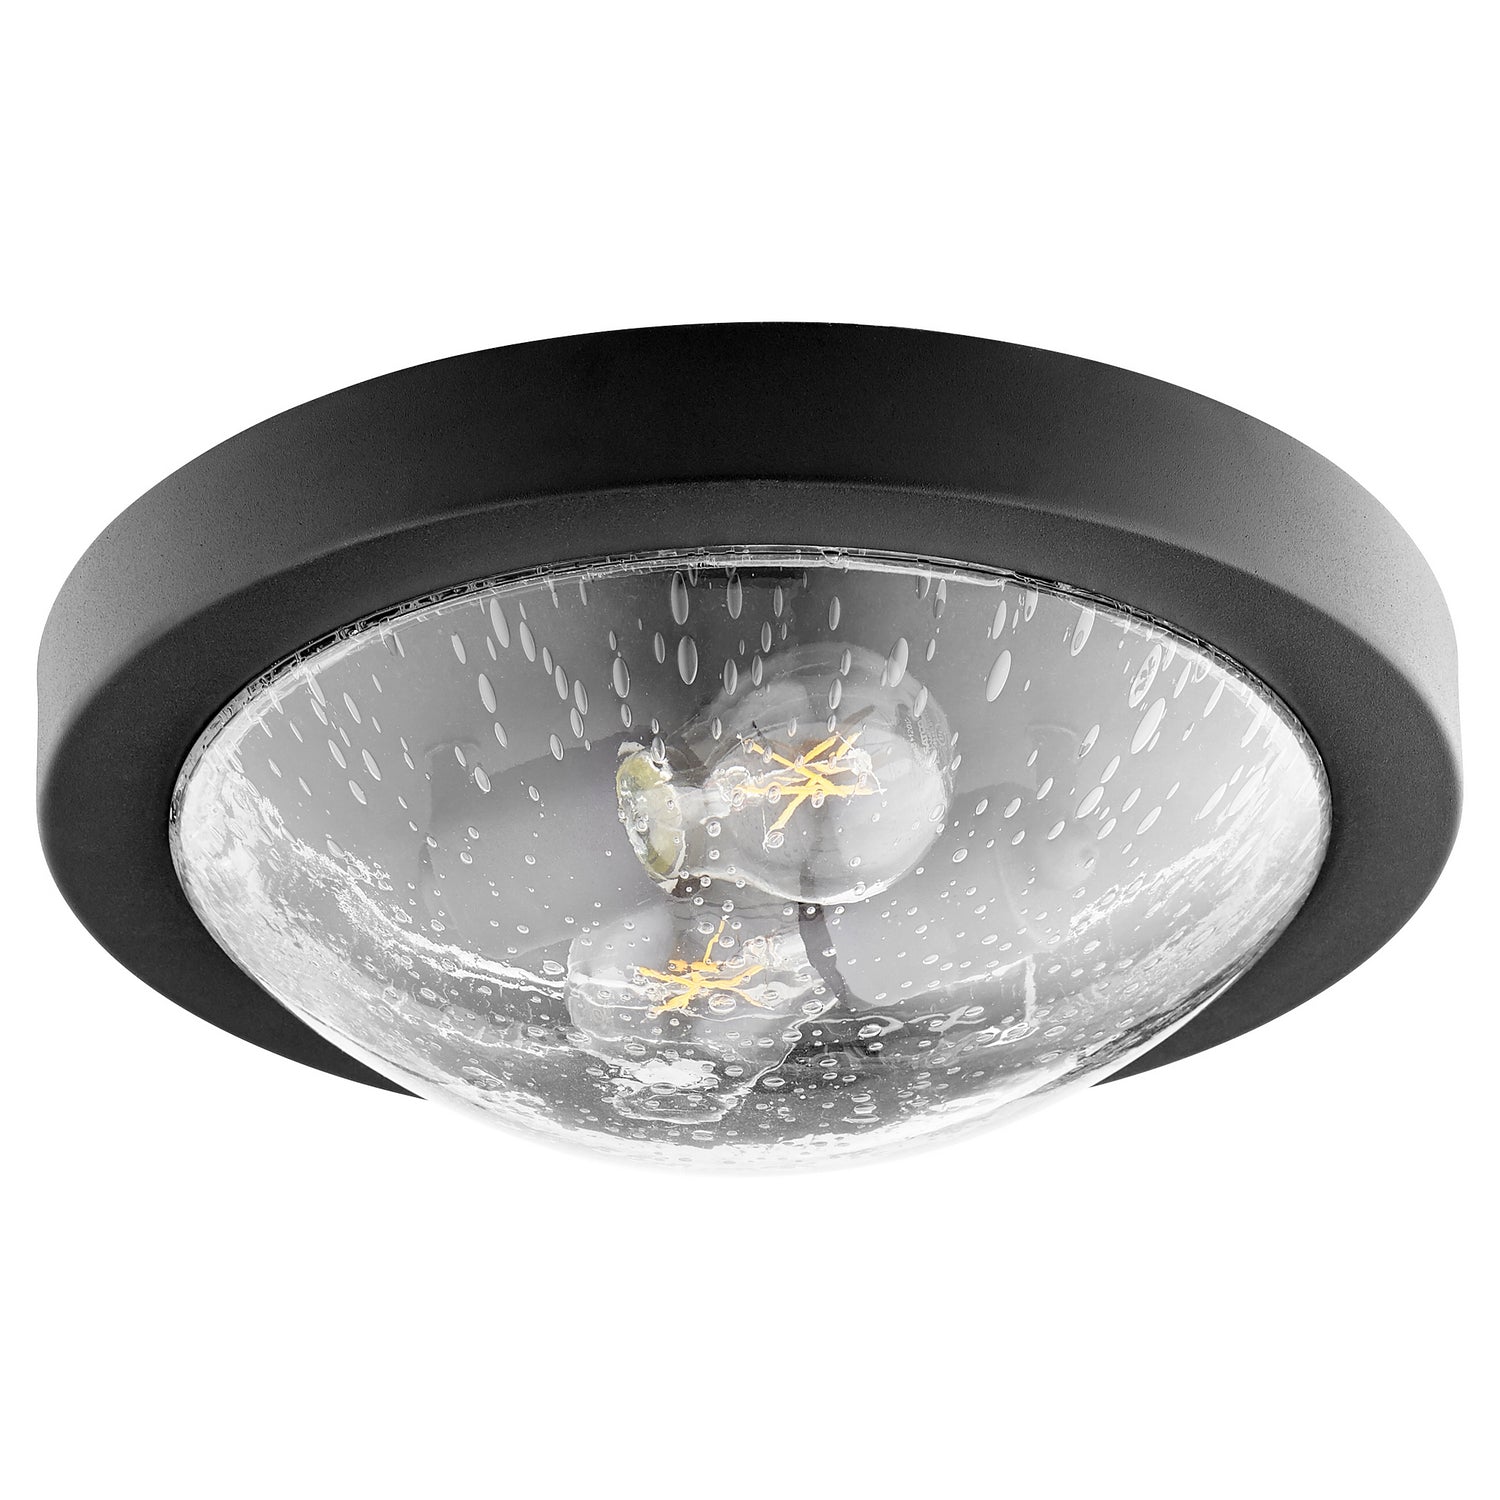 Quorum - 3502-13-69 - Two Light Ceiling Mount - 3502 Contempo Ceiling Mounts - Textured Black w/ Clear/Seeded